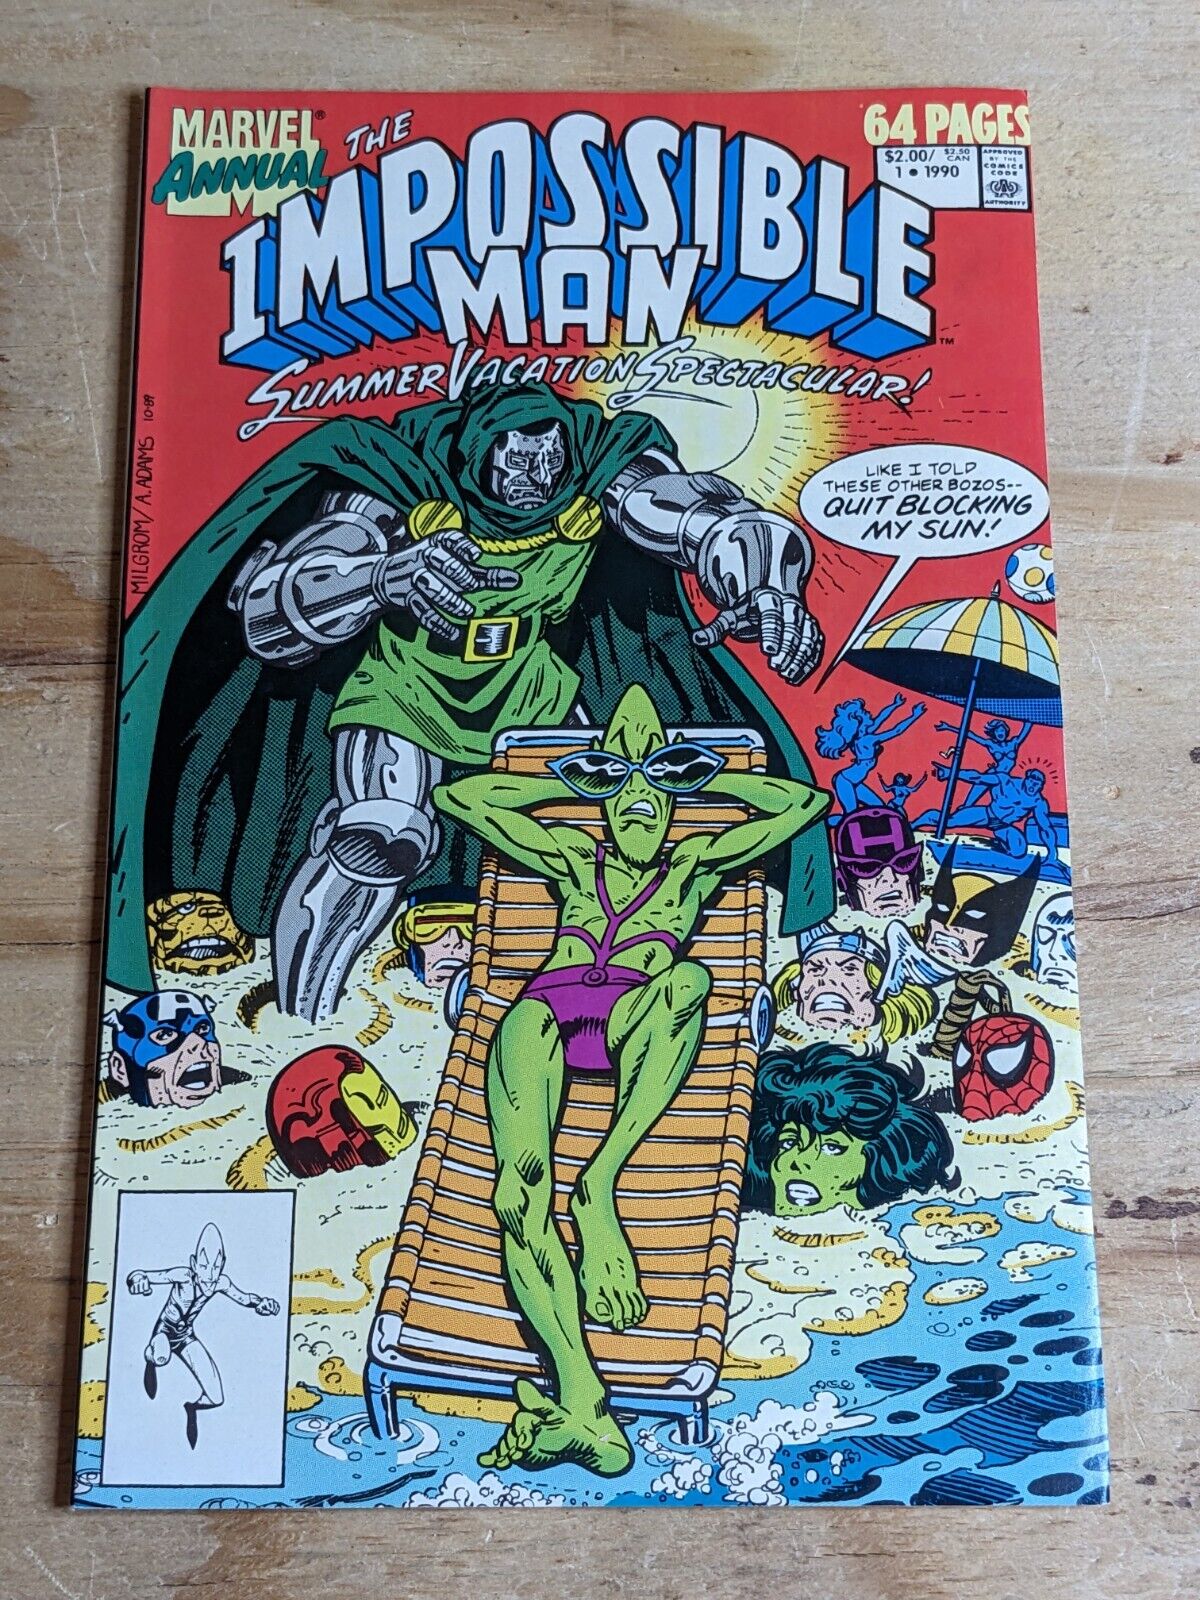 The Impossible Man Annual #1 (Marvel Comic 1990) Summer Vacation Spectacular